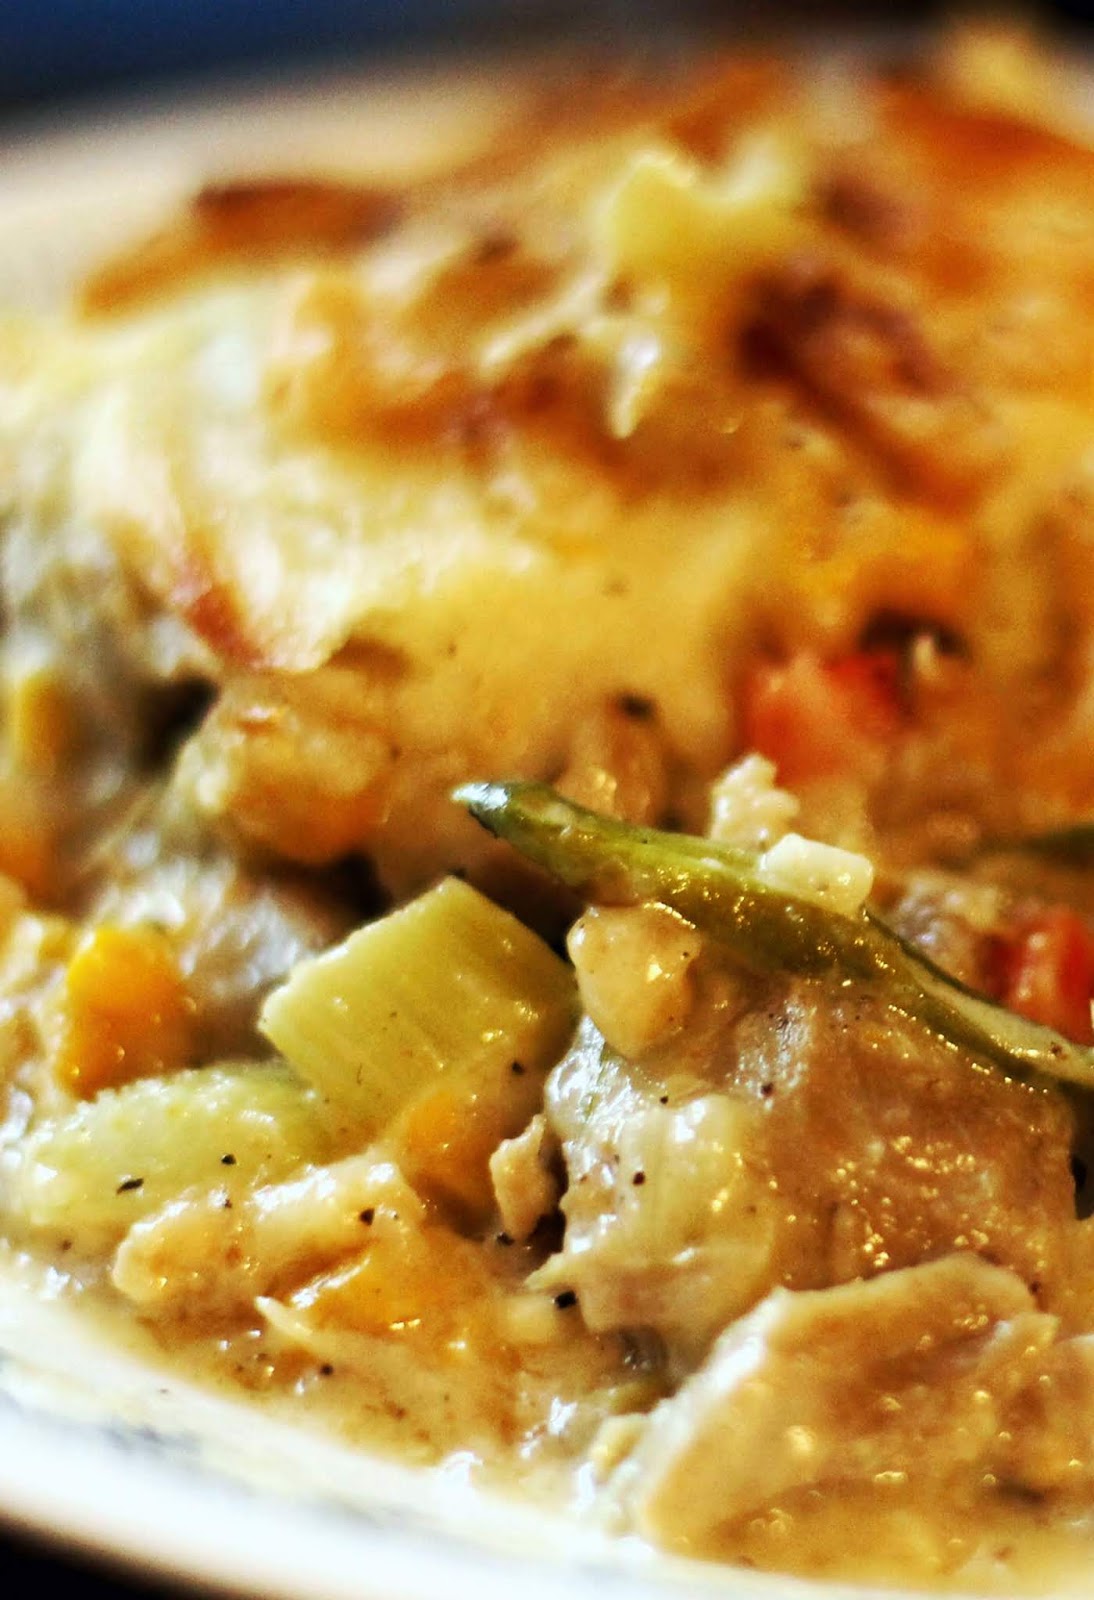 Cooking With Mary and Friends: Turkey Supreme Casserole